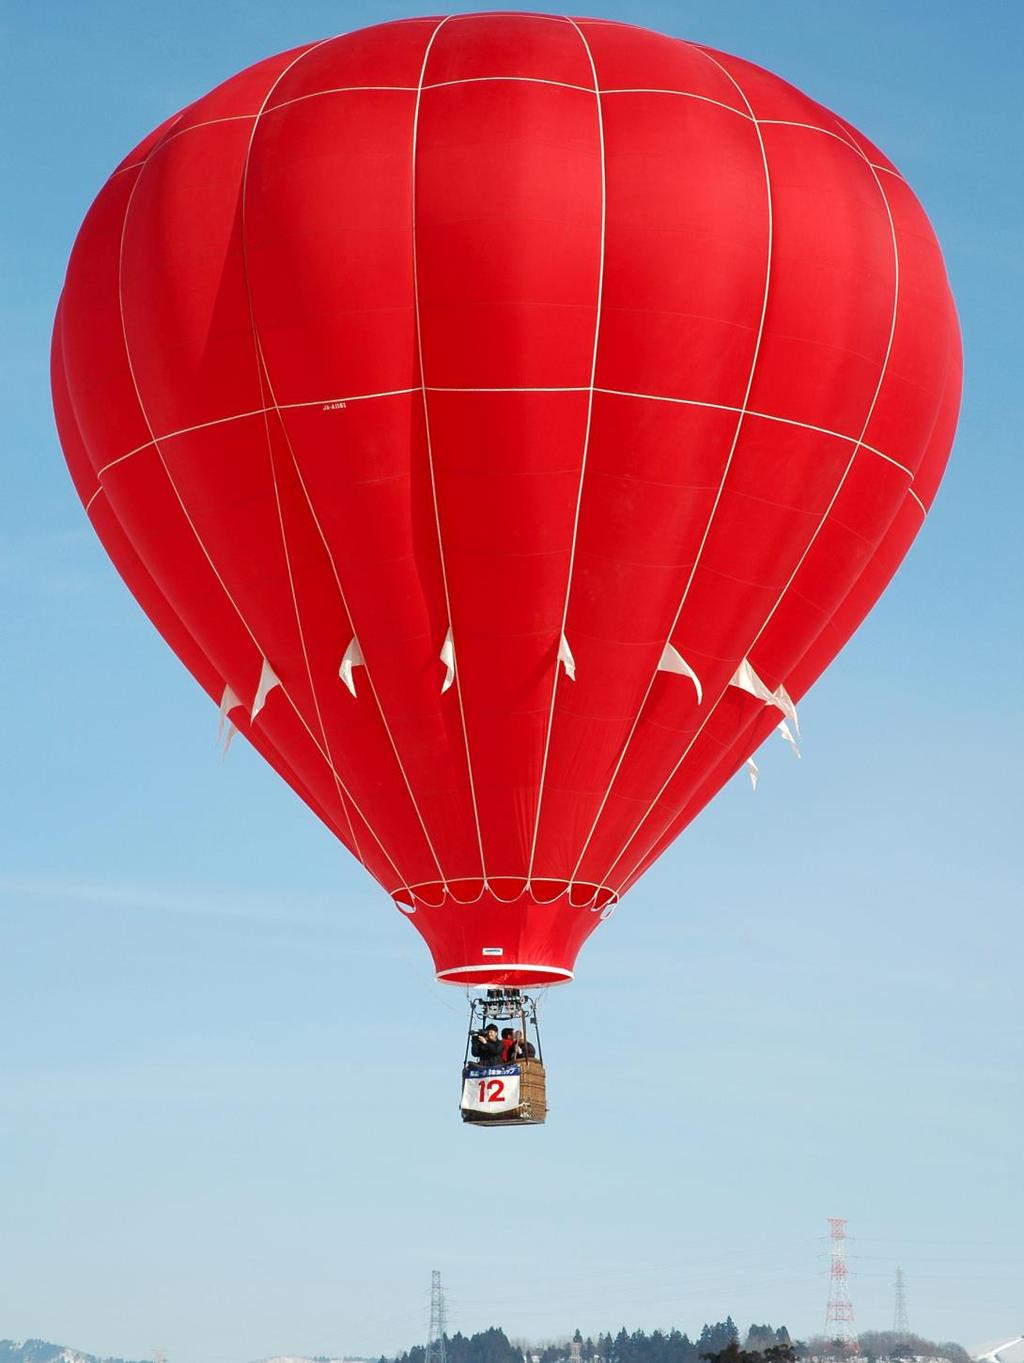 A balloon and rider in the basket below will be in the effect of the drift of the balloon.